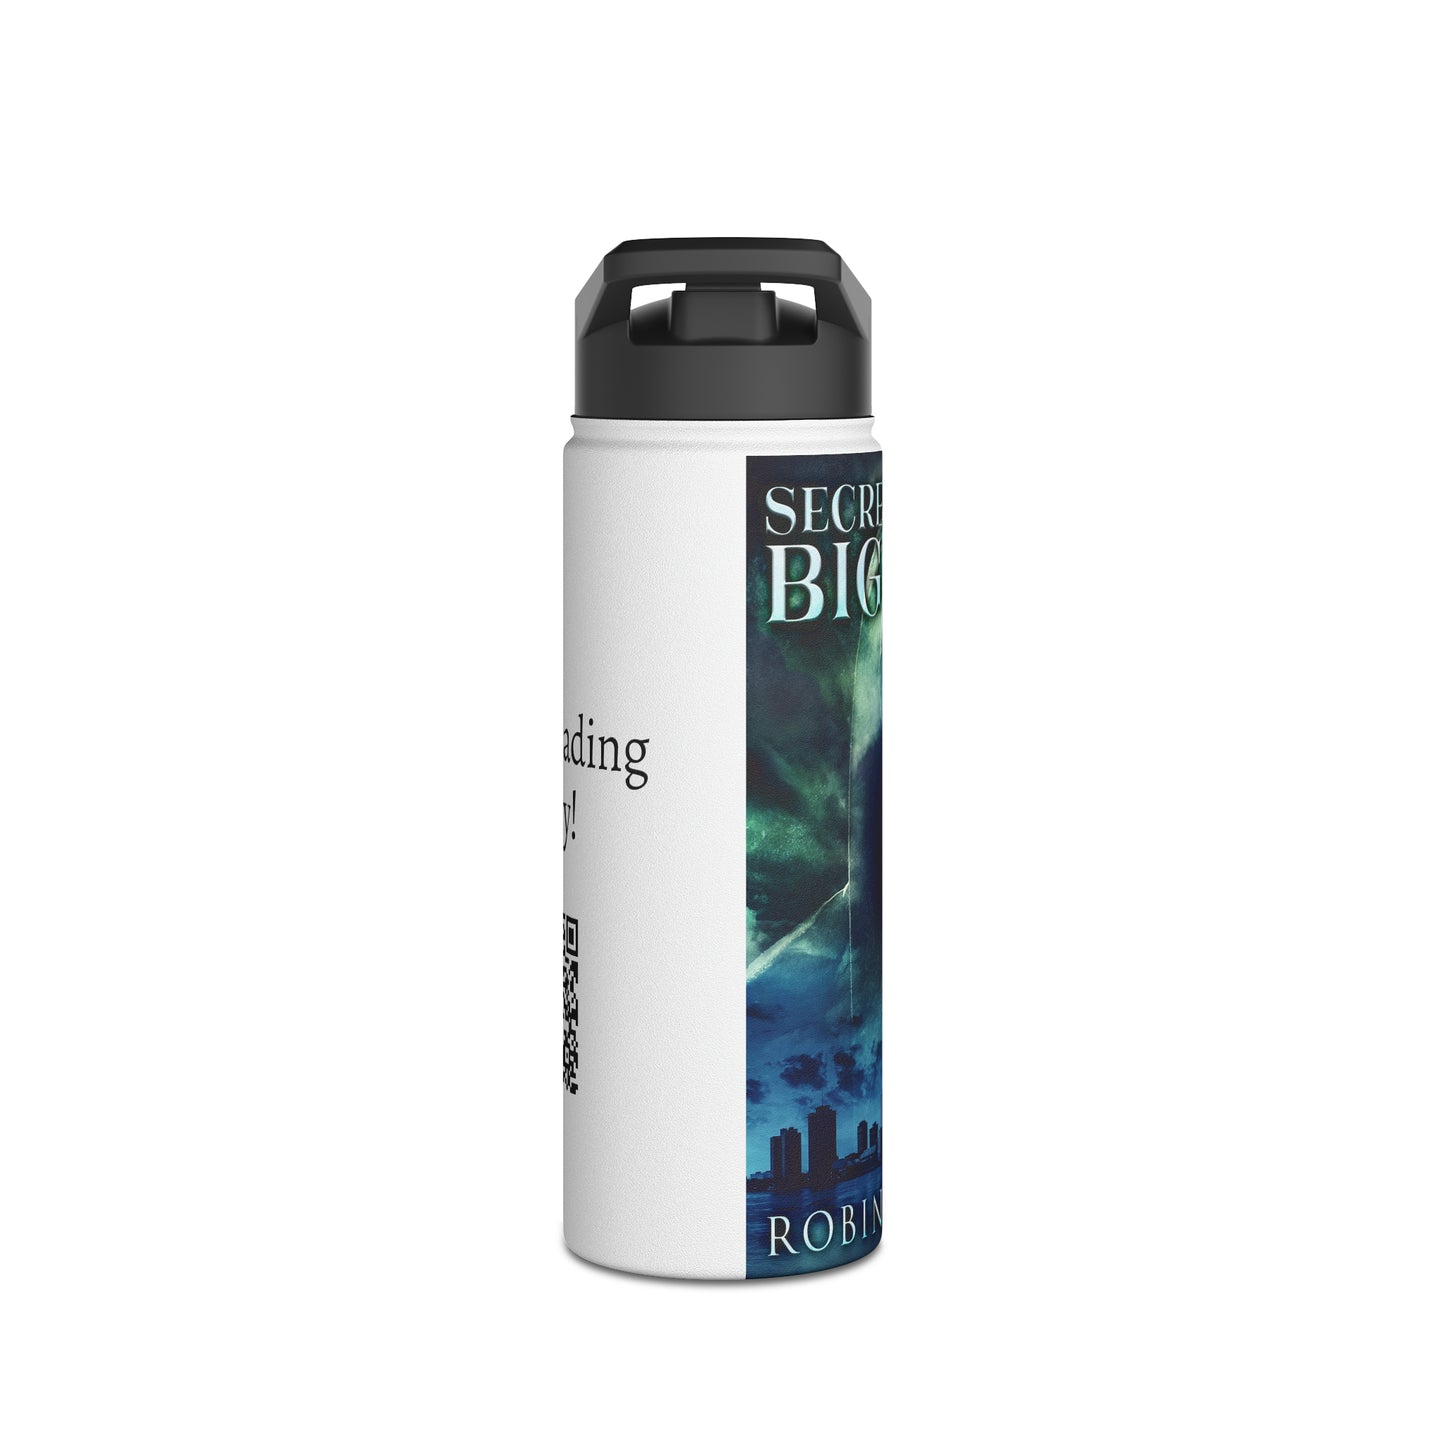 Secret Of The Big Easy - Stainless Steel Water Bottle